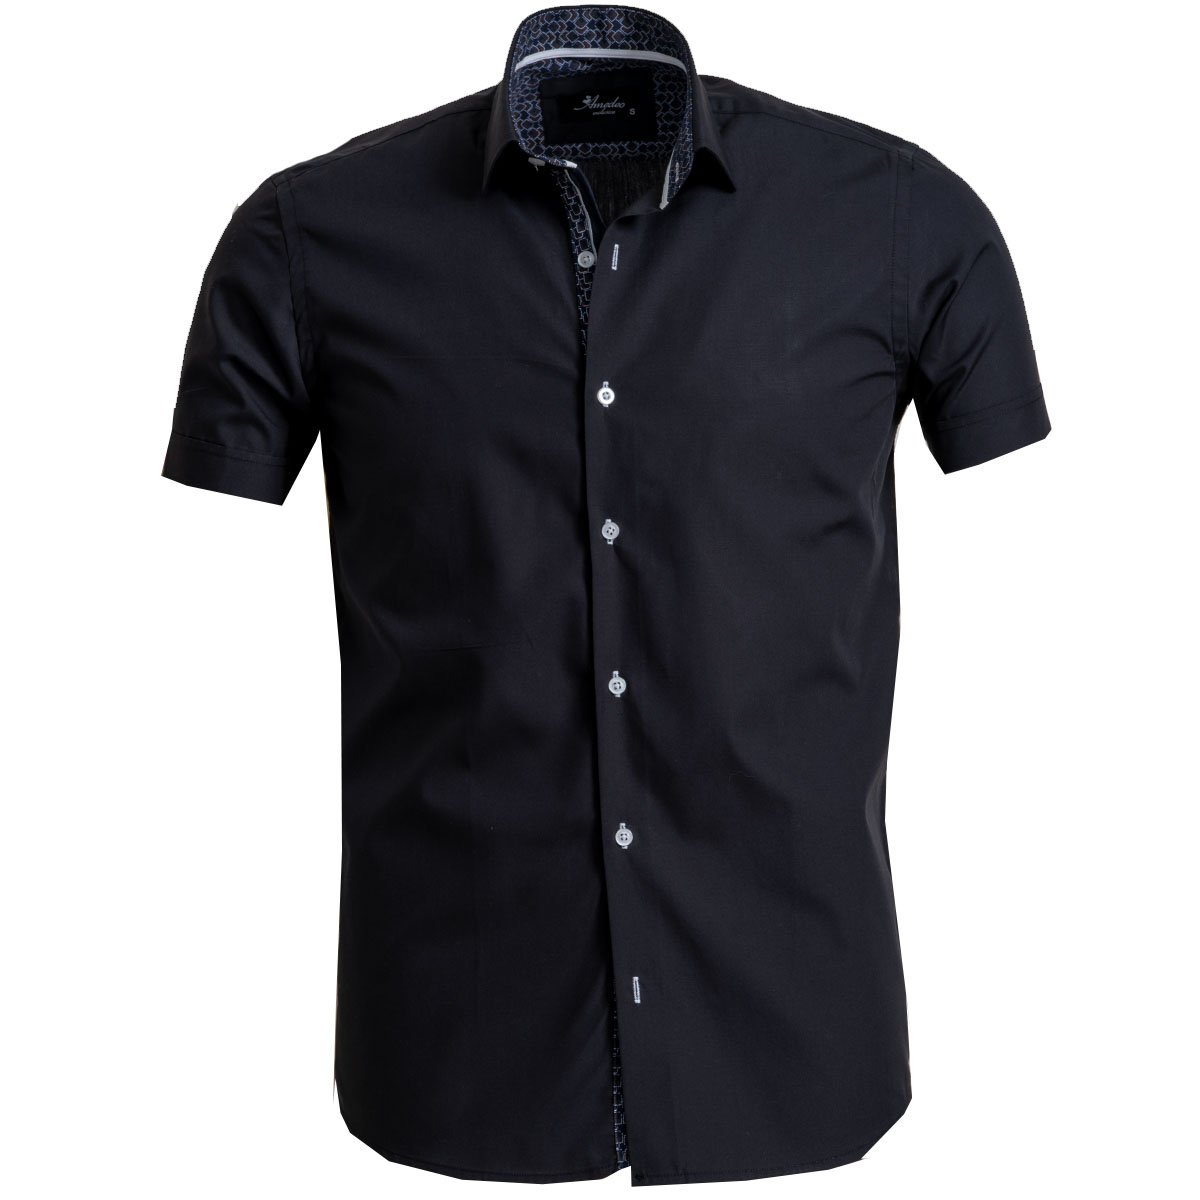 Solid Black Mens Short Sleeve Button up ...